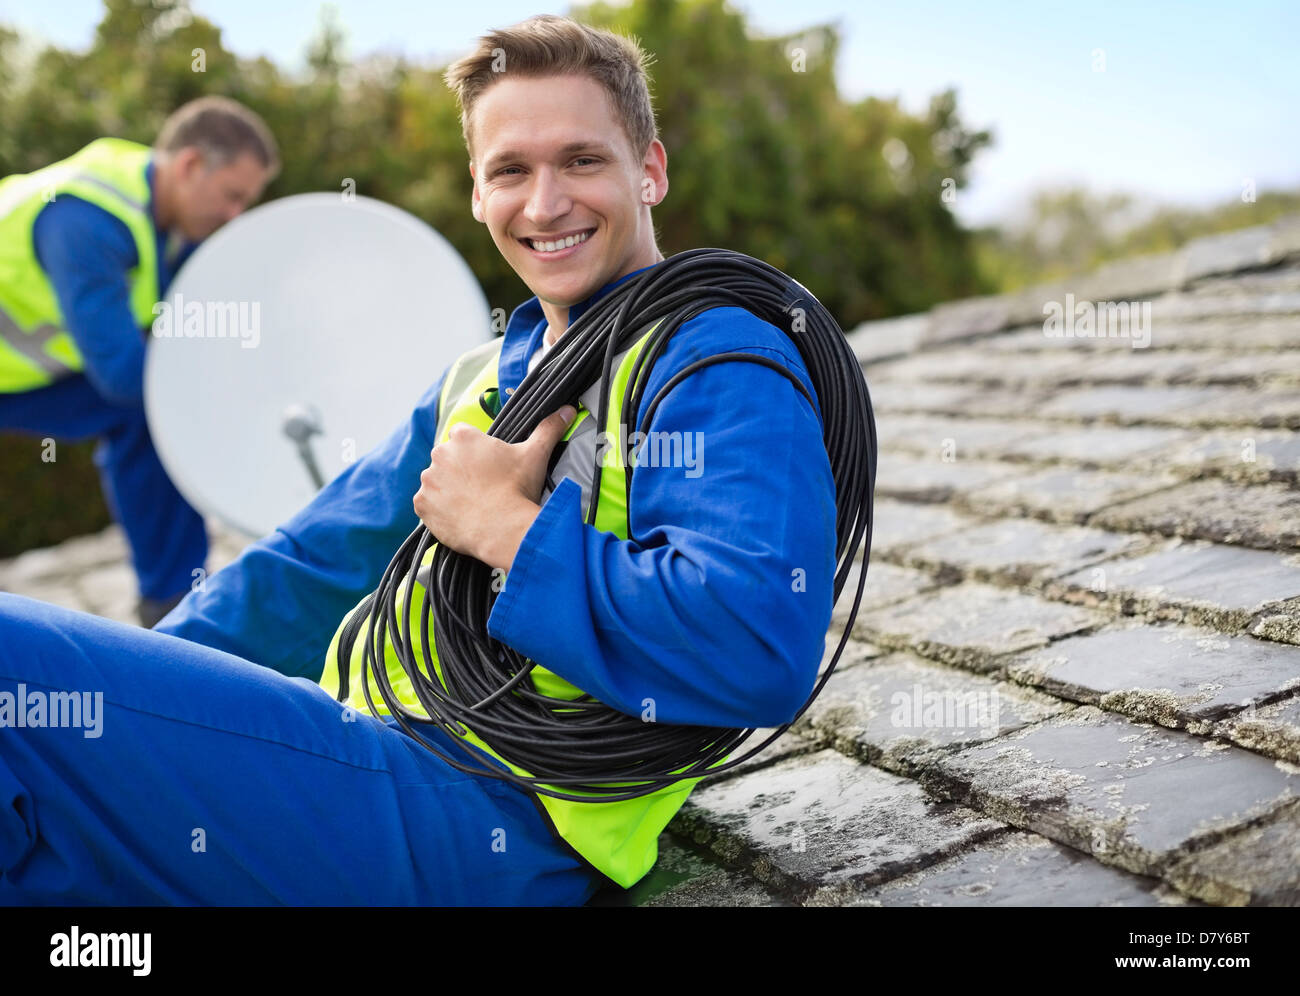 Workers installing satellite dish on roof Stock Photo